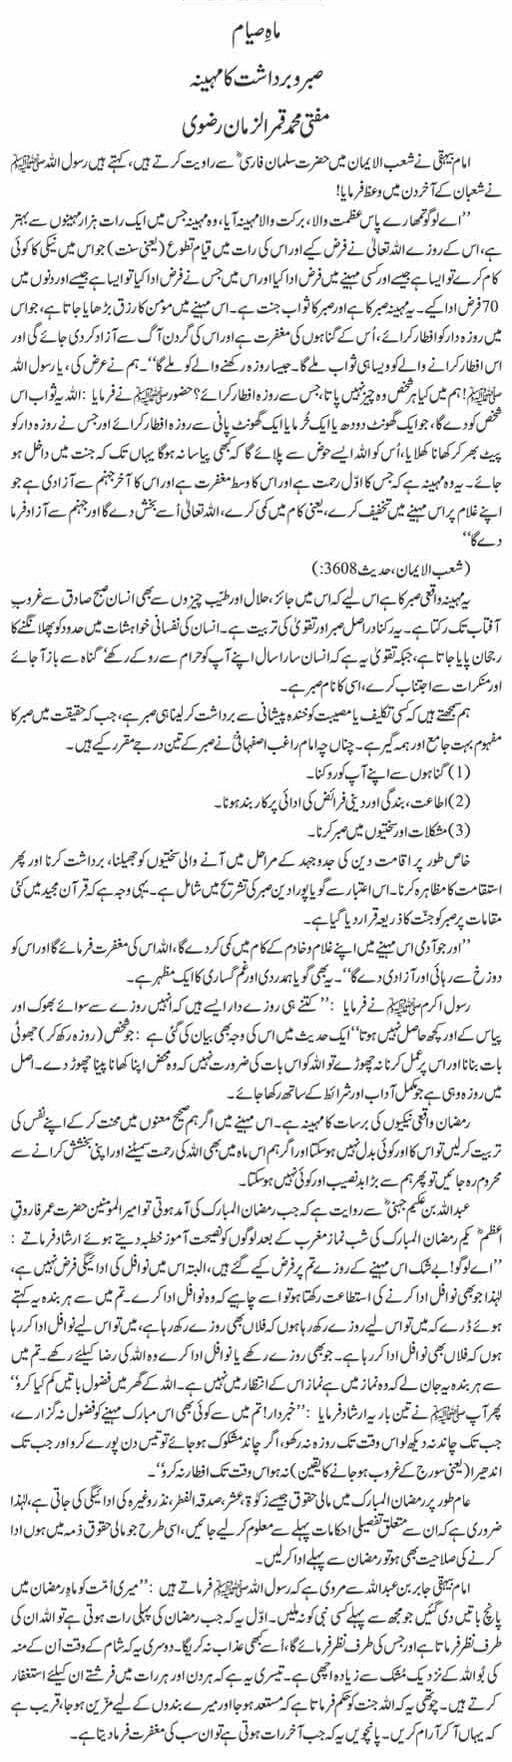 Essay on Ramazan with Outlines in Urdu & English